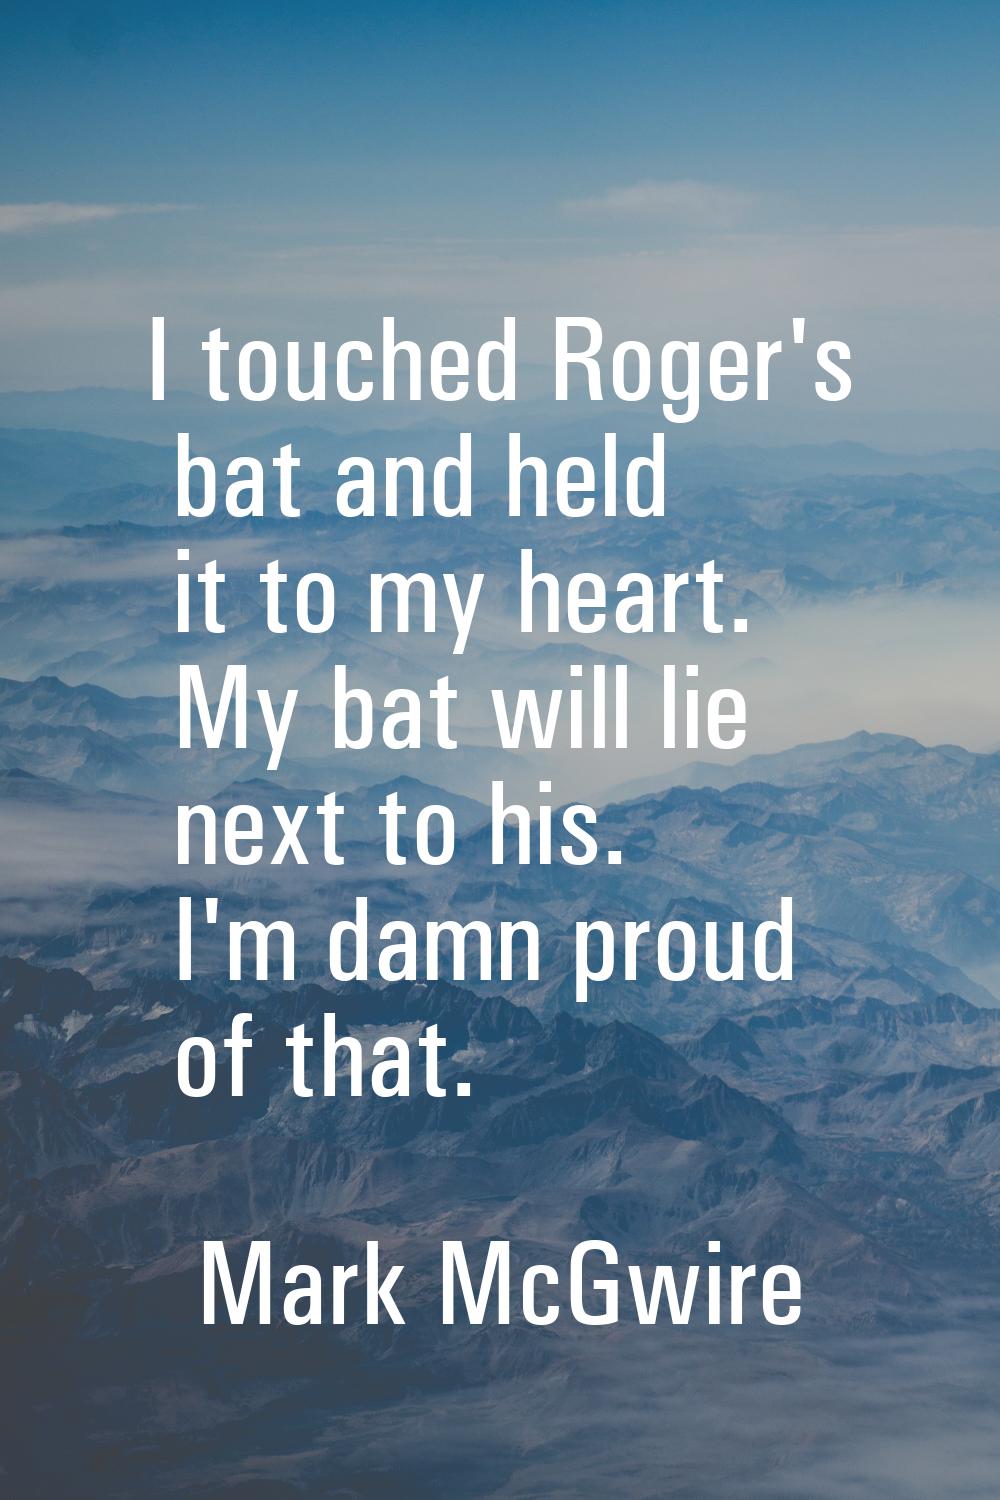 I touched Roger's bat and held it to my heart. My bat will lie next to his. I'm damn proud of that.